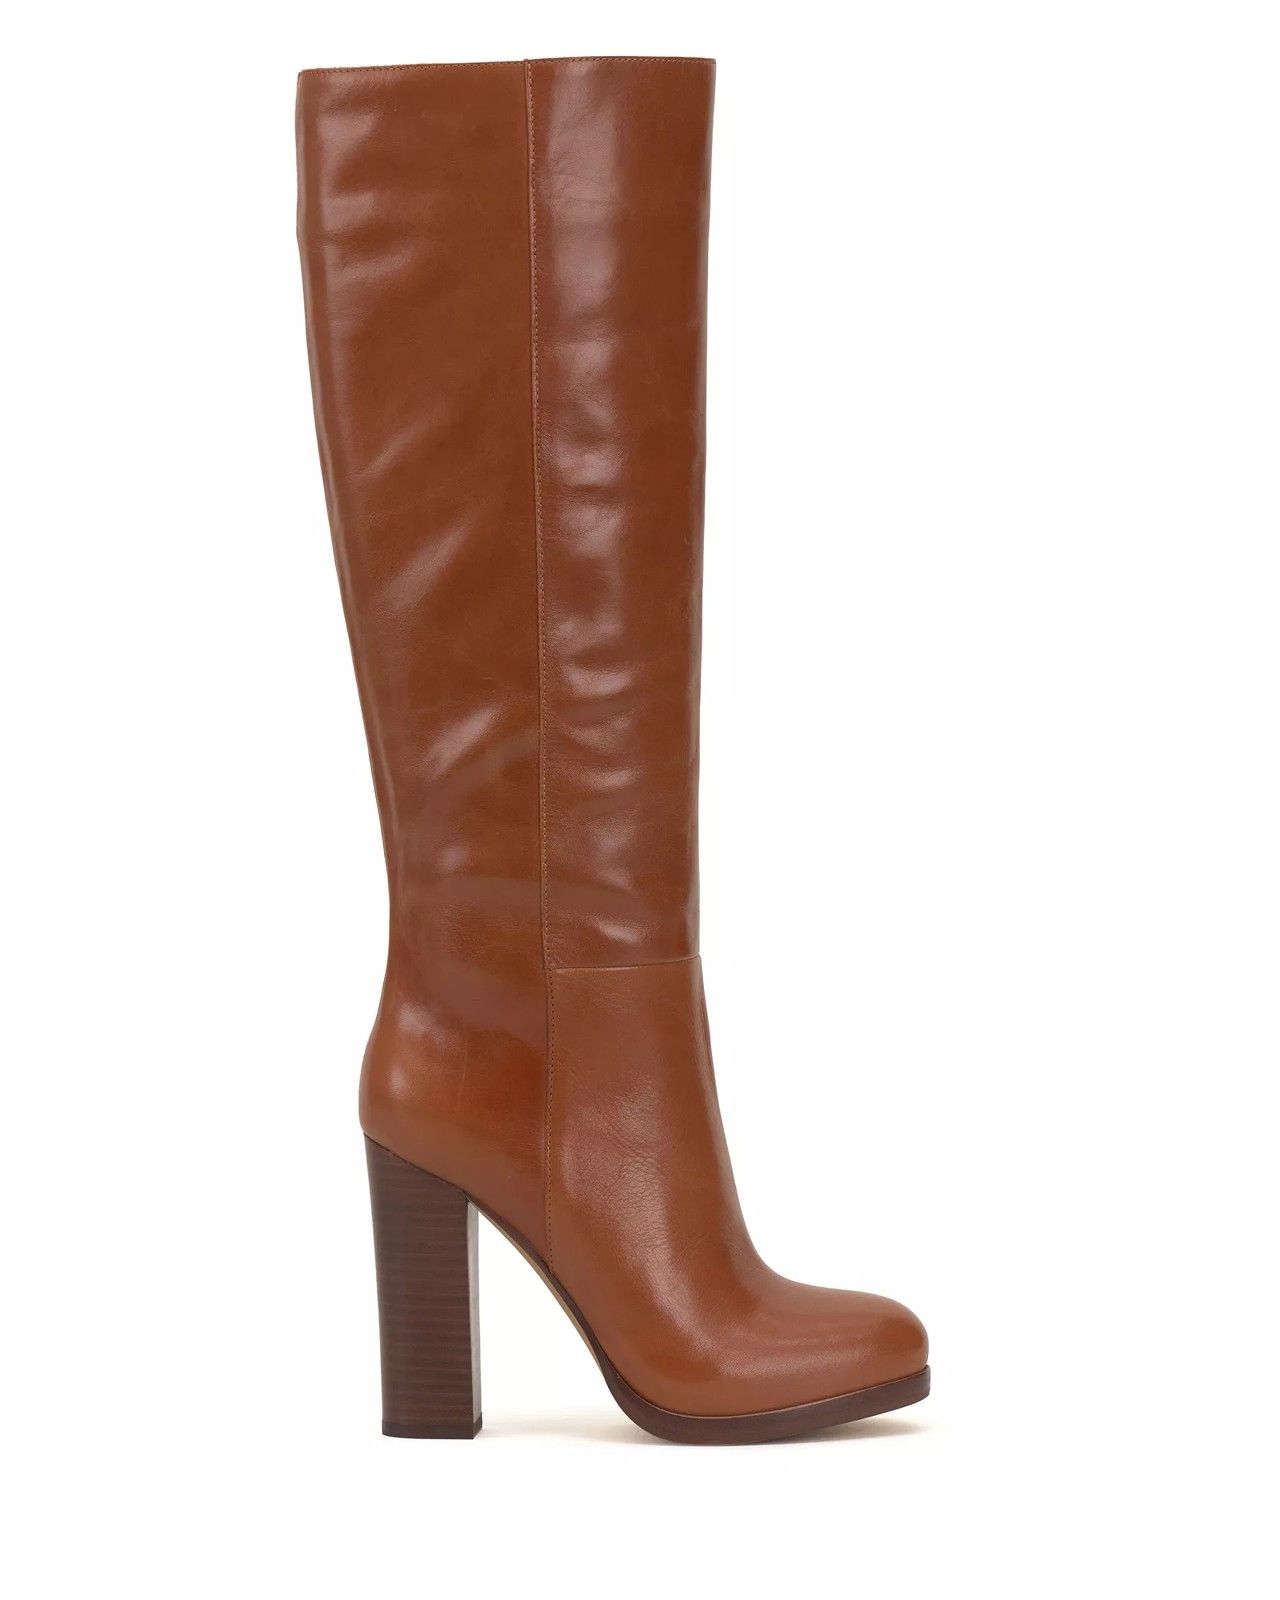 Vince Camuto Crutinie Wide-Calf Boot | Vince Camuto